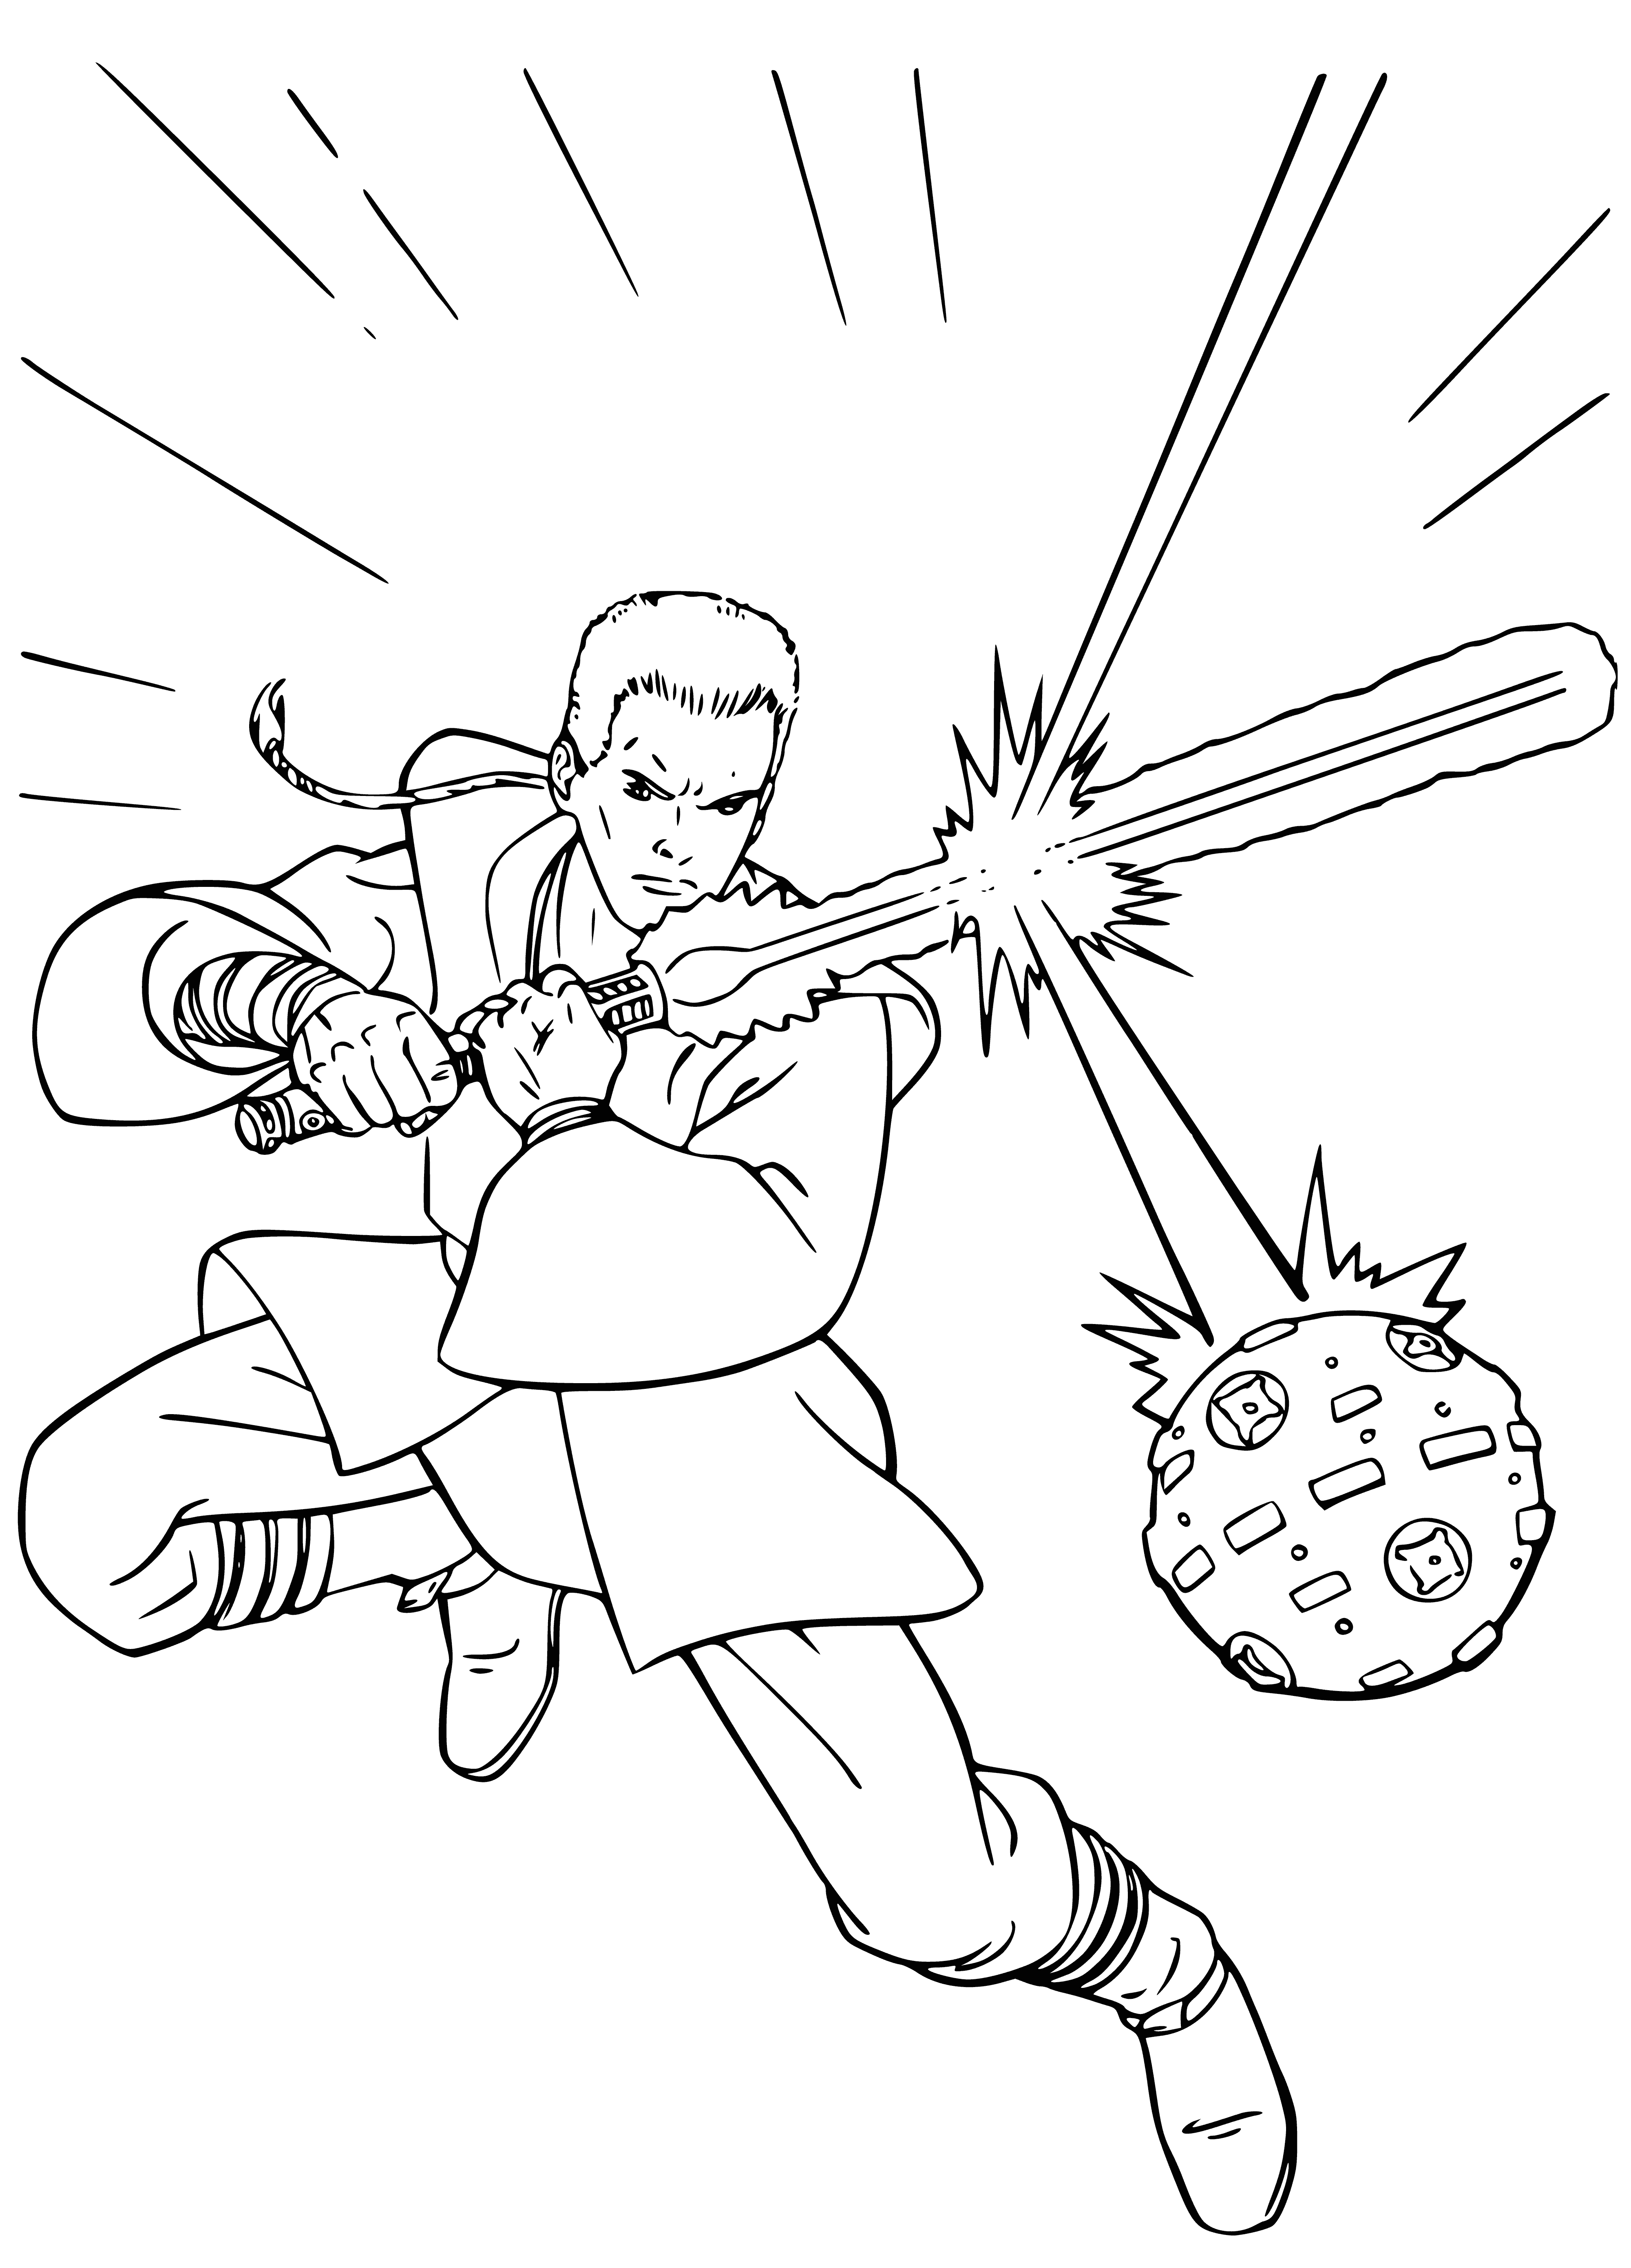 Jedi training coloring page